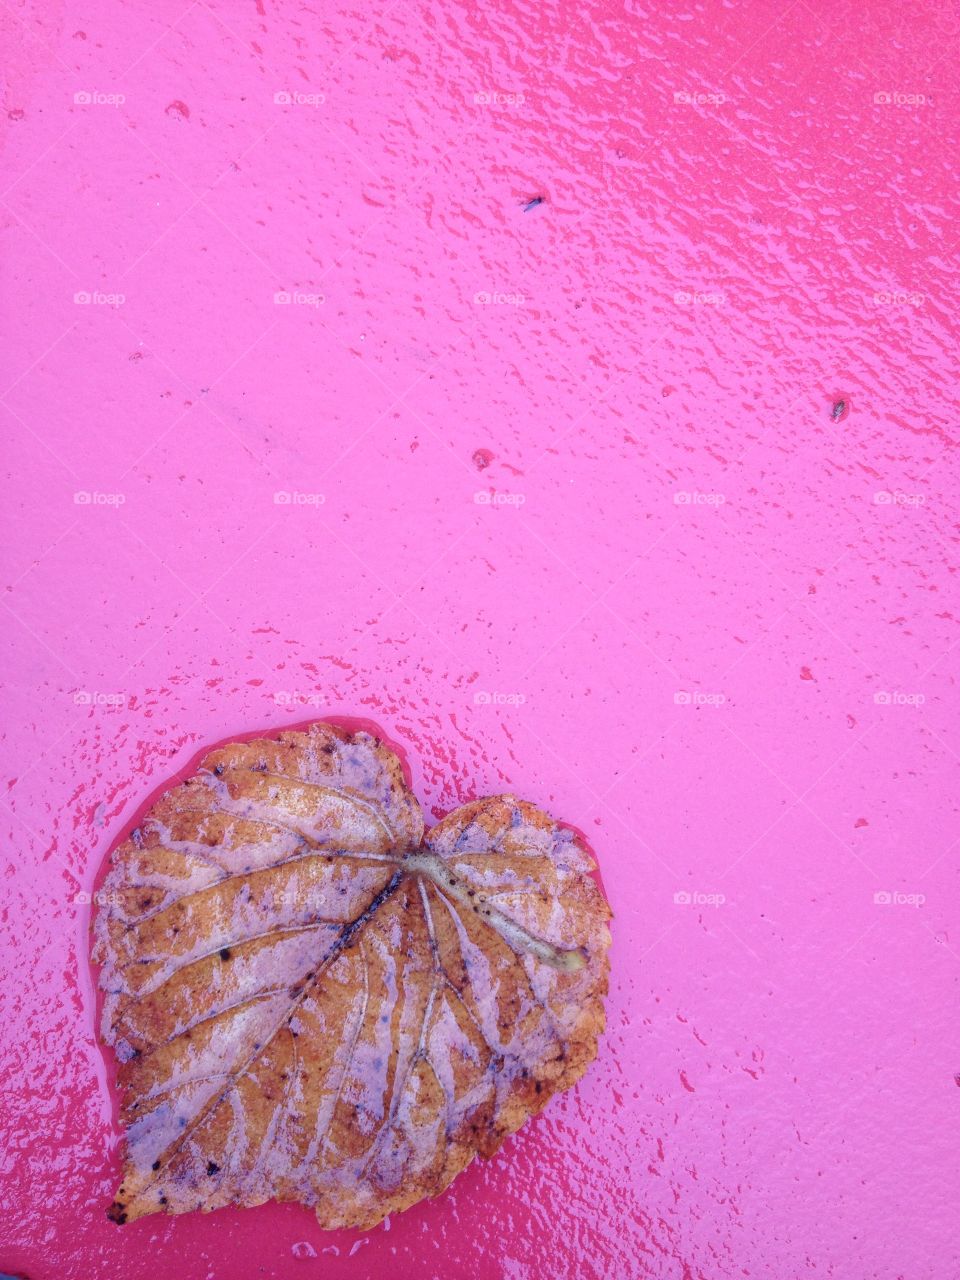 Leaf on top of pink wall. Autumn leaf sat on a pink wall one rainy day in November